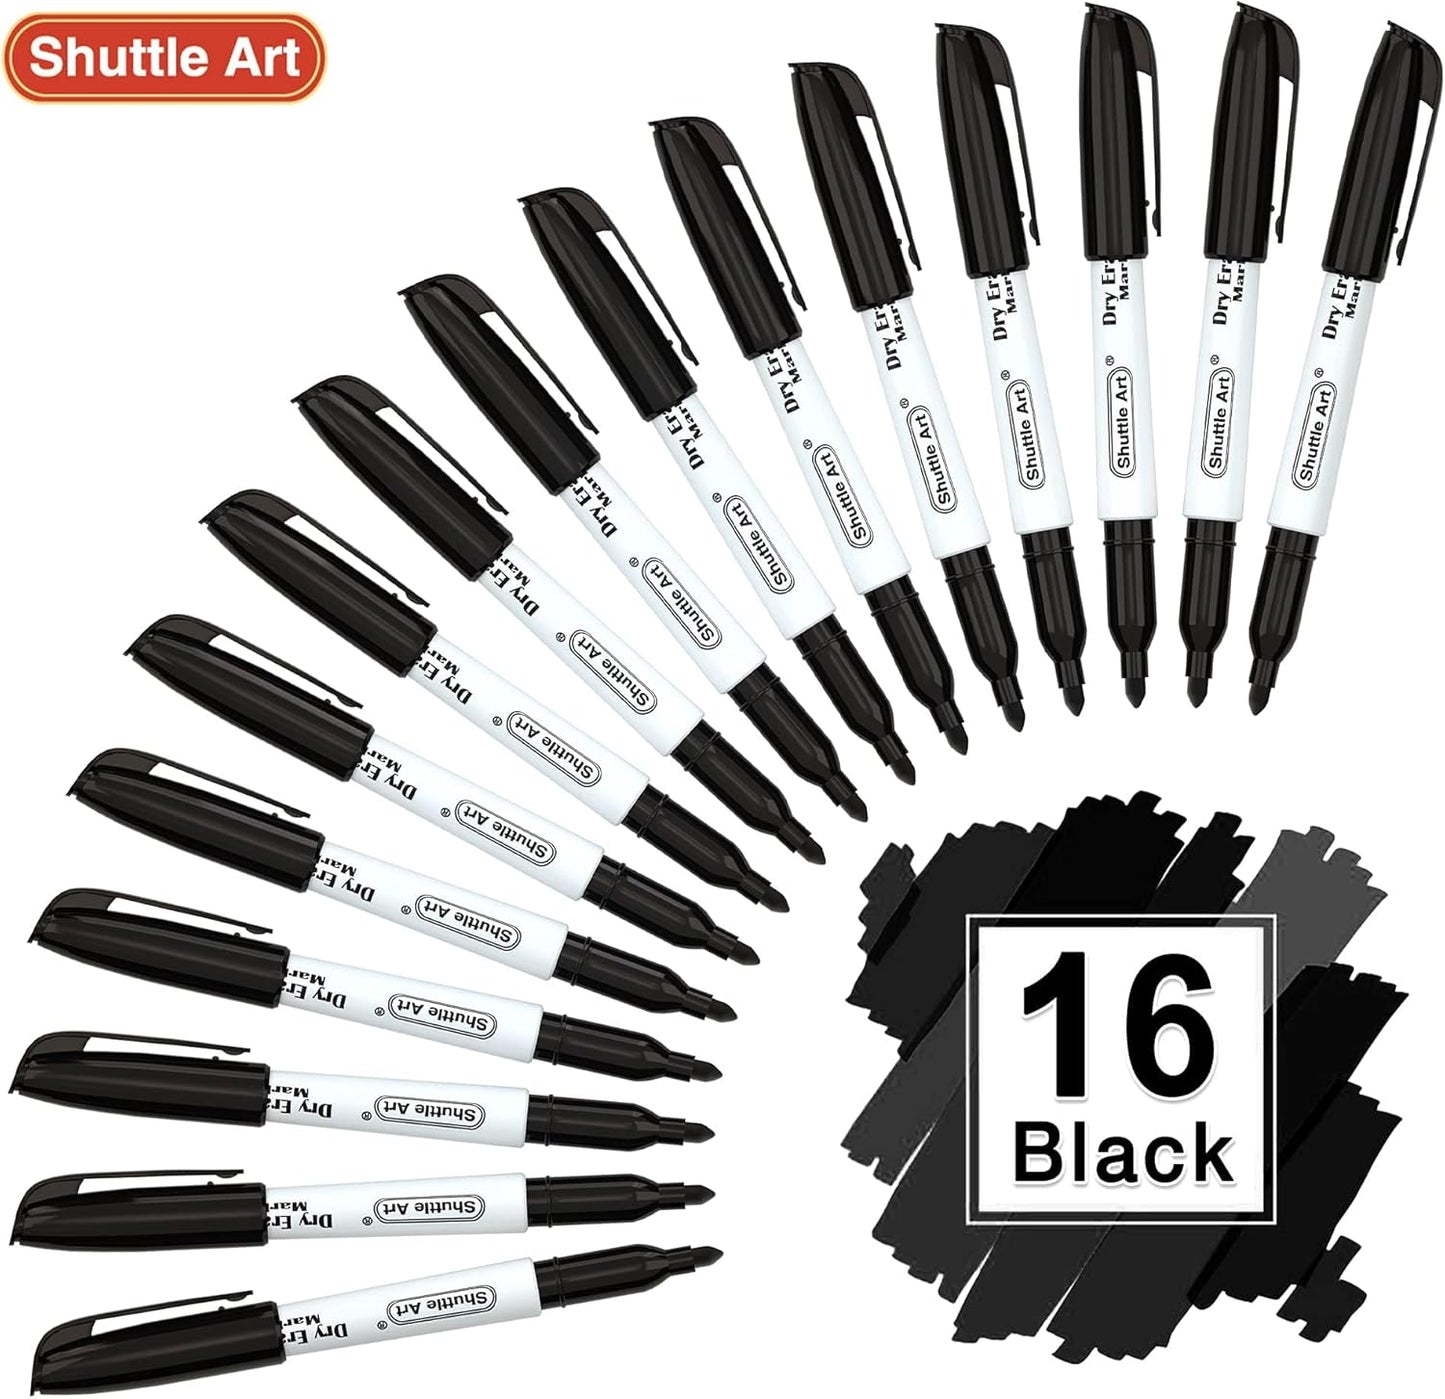 Dry Erase Markers, 16 Pack Black Whiteboard Markers,Fine Tip Dry Erase Markers for Kids,Perfect for Writing on Whiteboards, Dry-Erase Boards,Mirrors,Calender,School Office Supplies